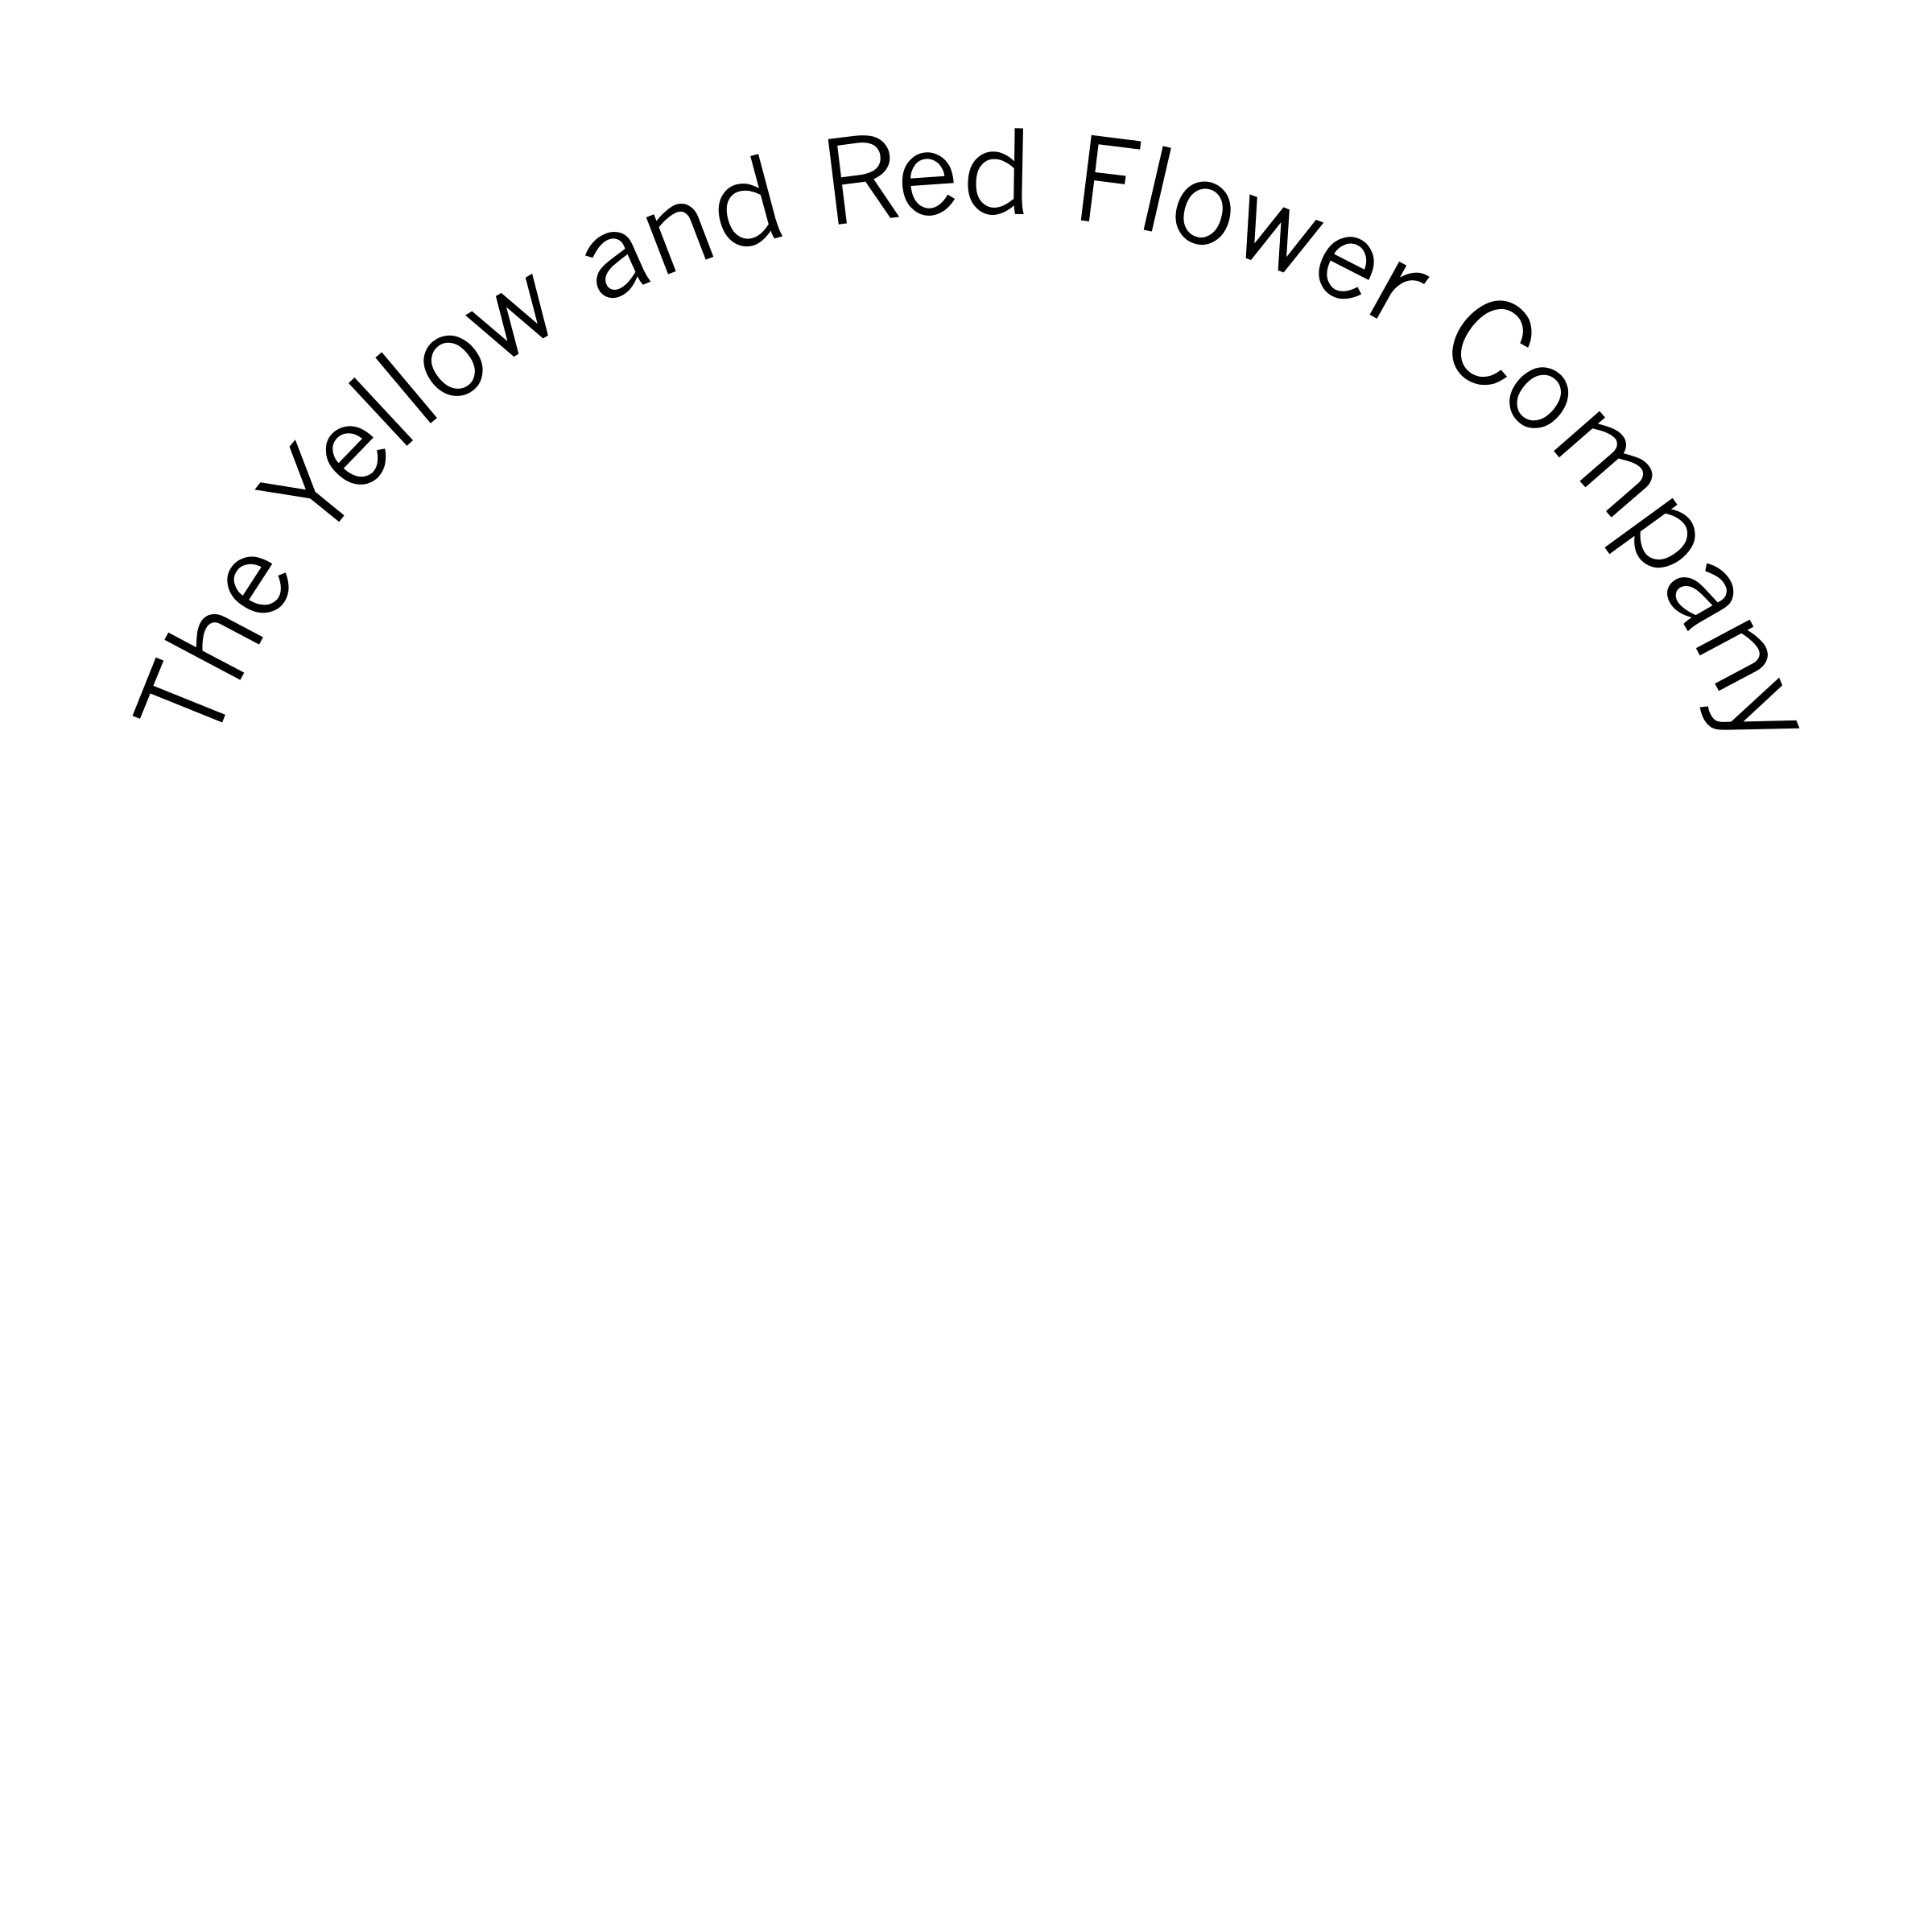 Black White and Red Company Logo - The Yellow and Red Flower Company Logo PNG Transparent & SVG Vector ...